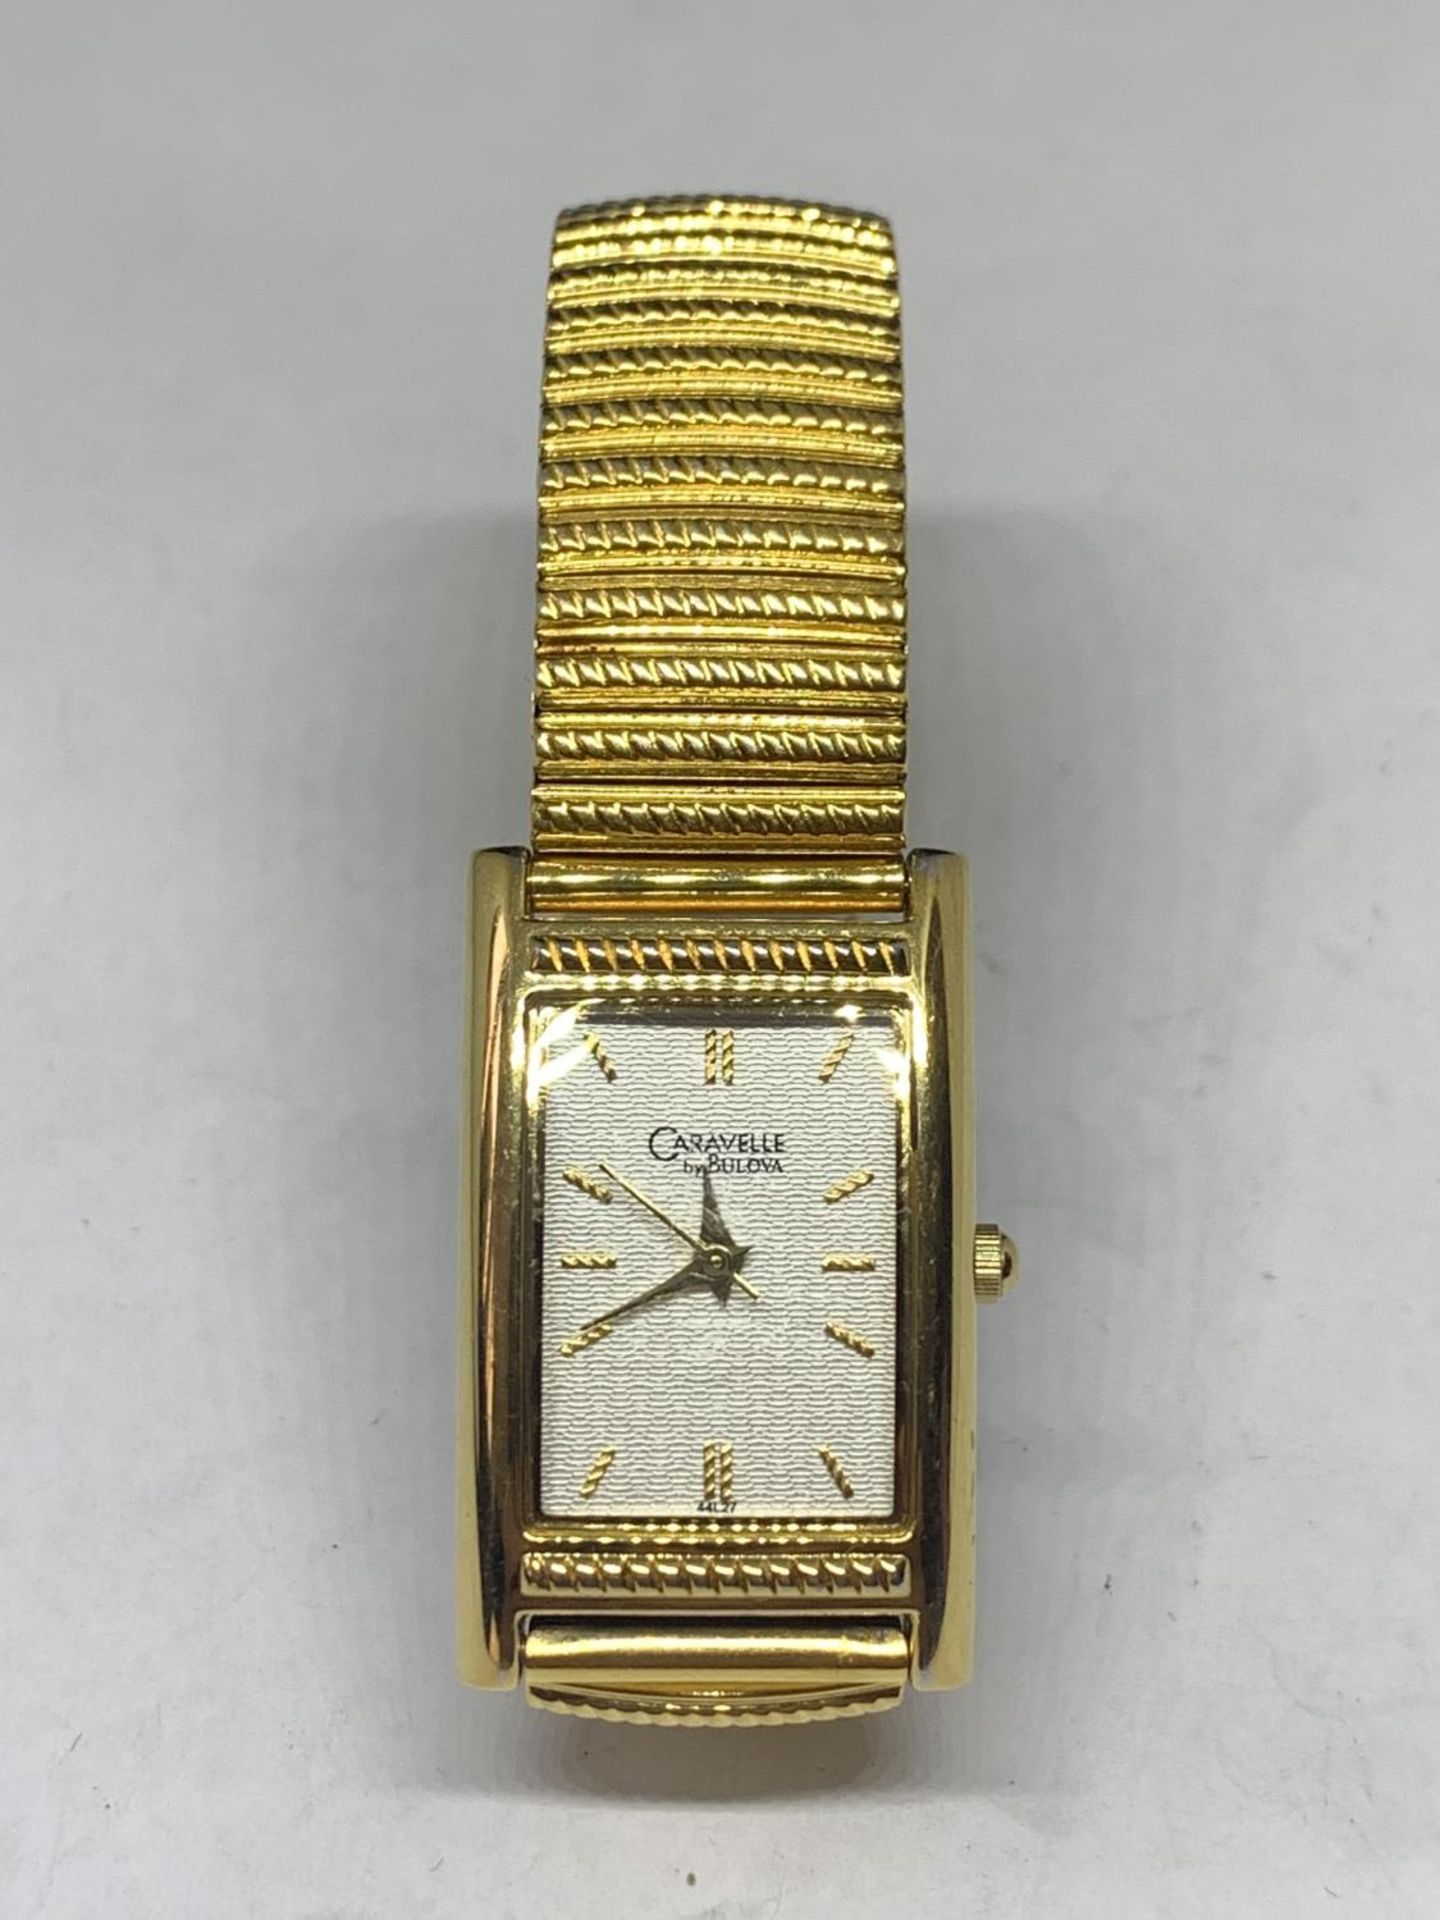 A GOLD PLATED CARAVELLE WRIST WATCH SEEN WORKING BUT NO WARRANTY